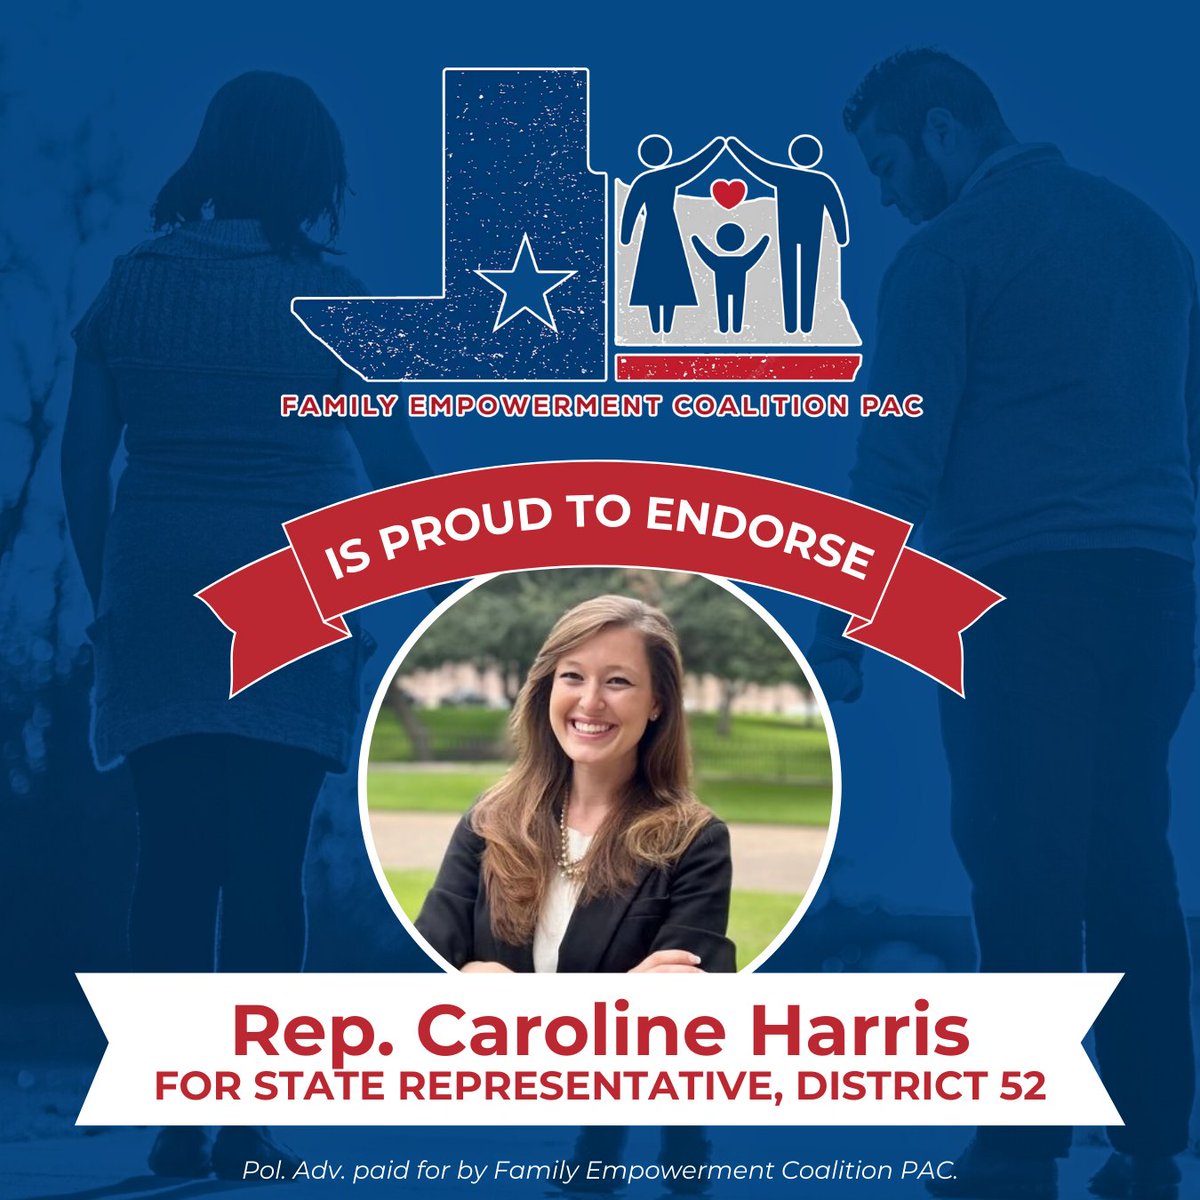 We’re proud to endorse State Rep. @CarolineForTX! Her commitment to educational savings accounts aligns with our mission at Family Empowerment Coalition PAC. Join us in supporting her re-election campaign for #HD52! fecpac.org #txlege